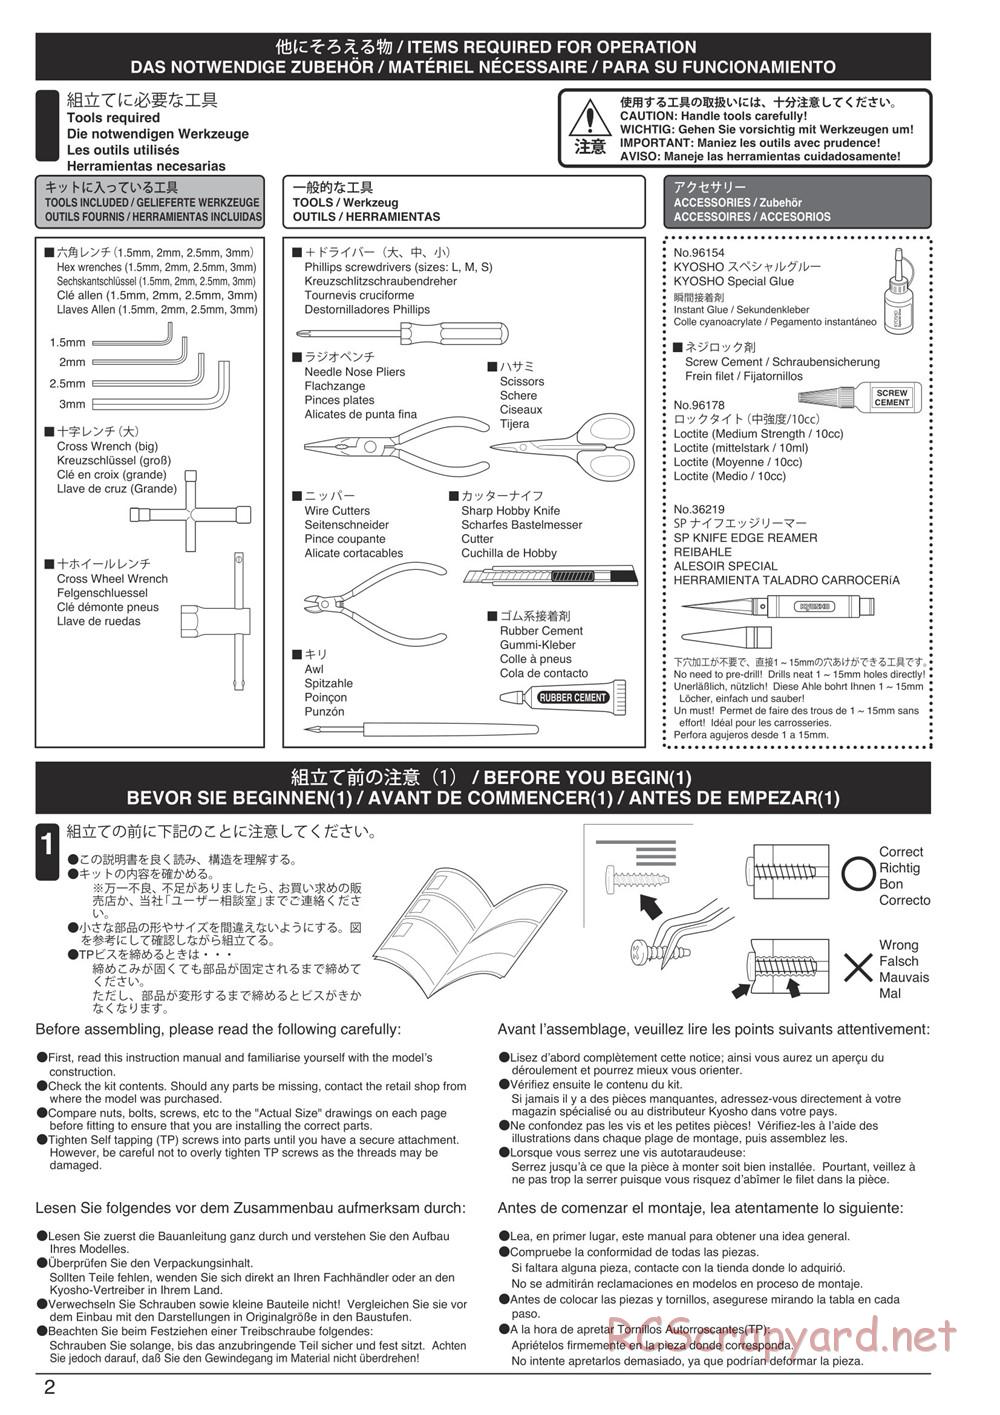 Kyosho - Inferno Neo - Manual - Page 2